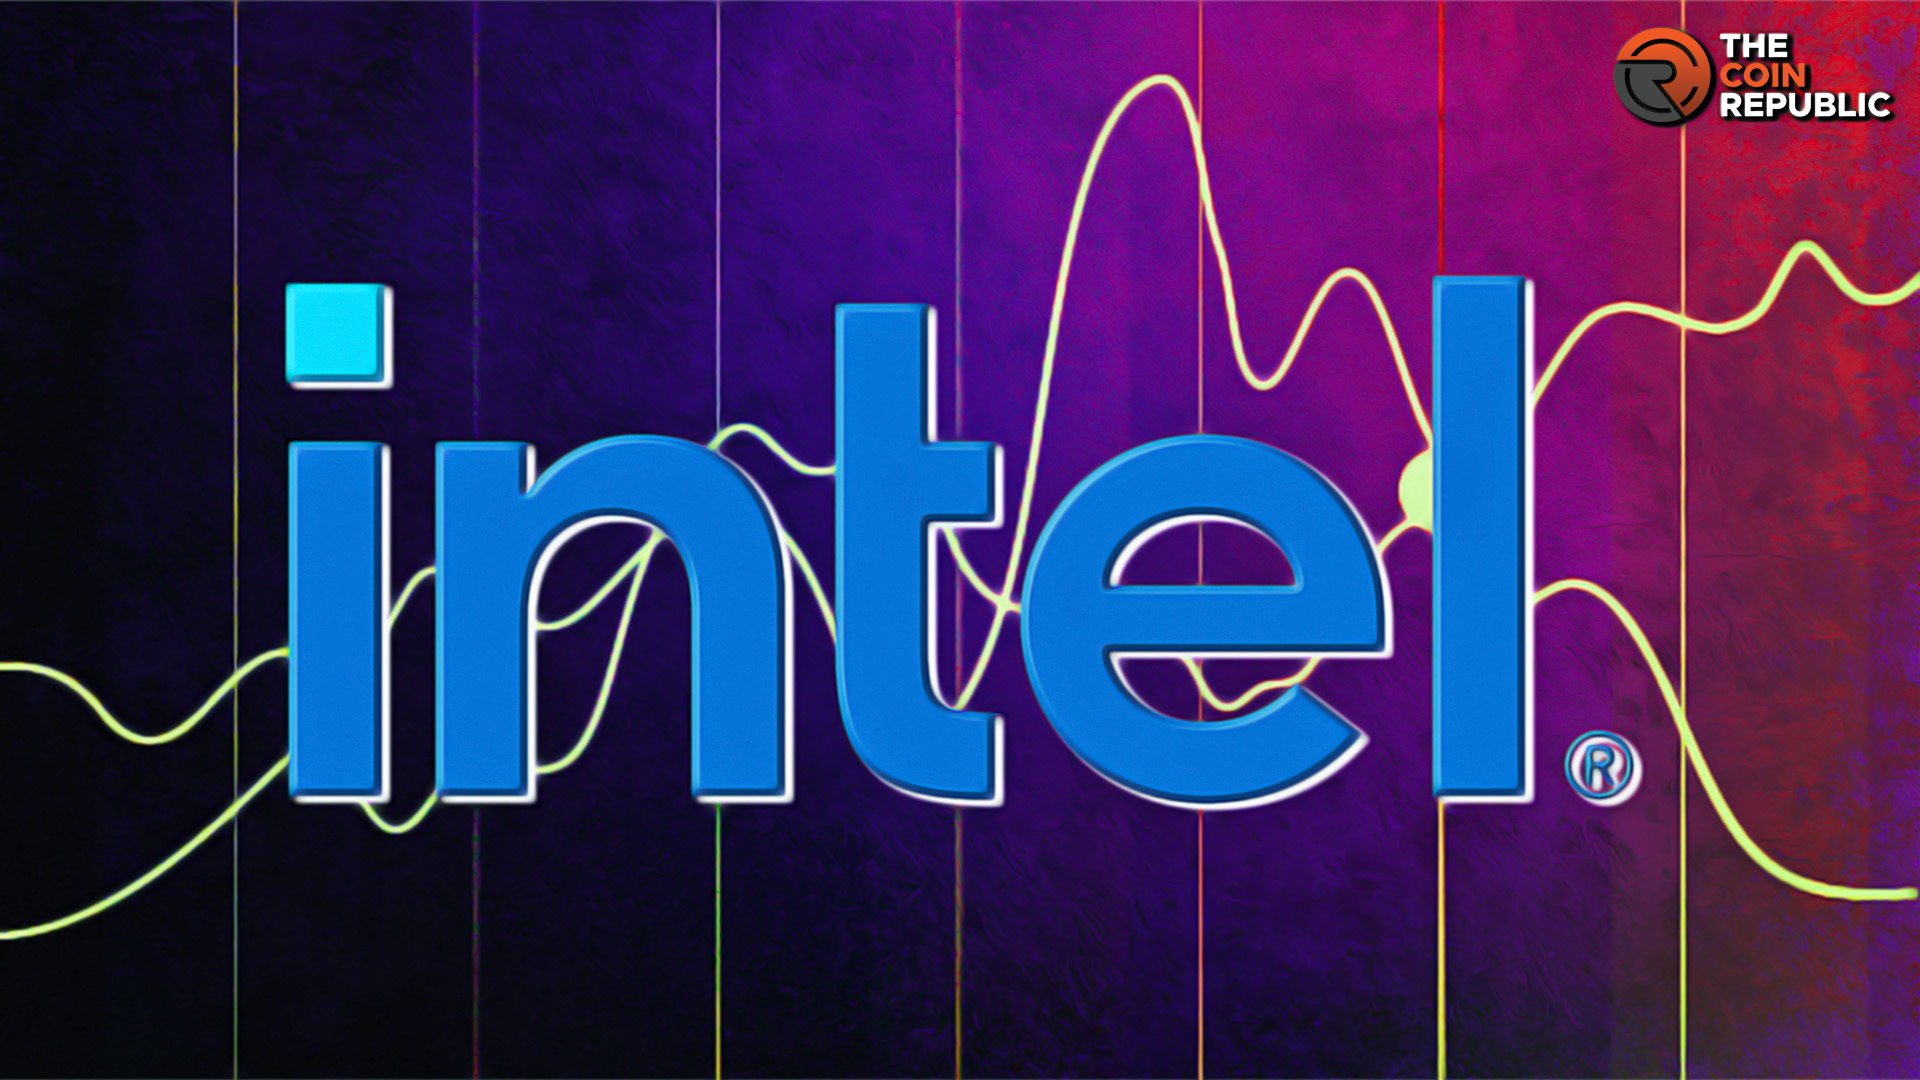 Intel Stock Price Prediction: INTC Review and Outlook For 2023